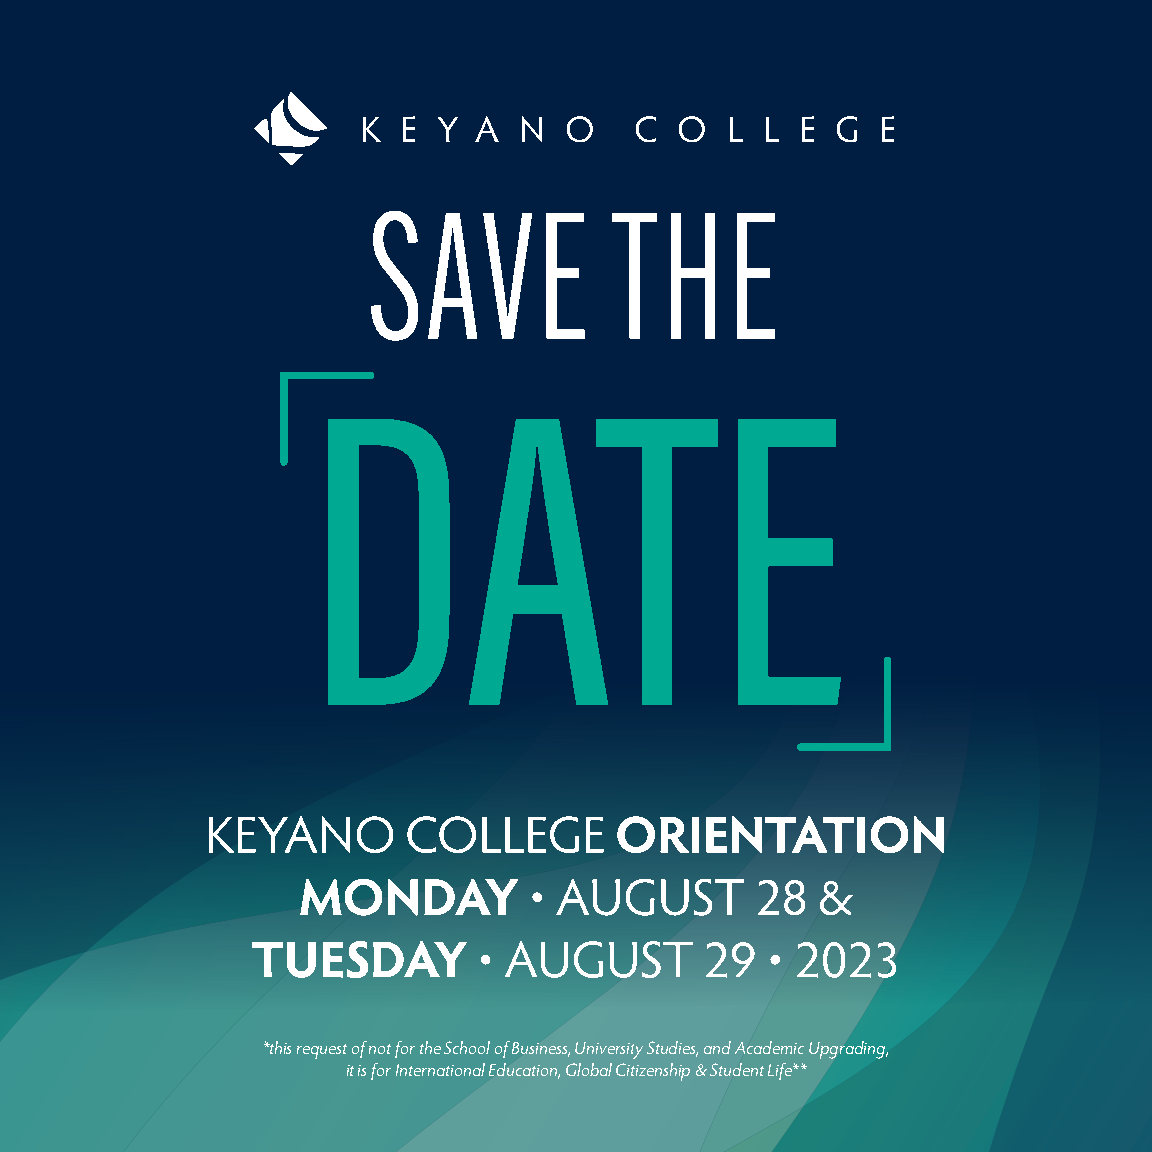 save the date: keyano college orientation August 28 & 28, 2023